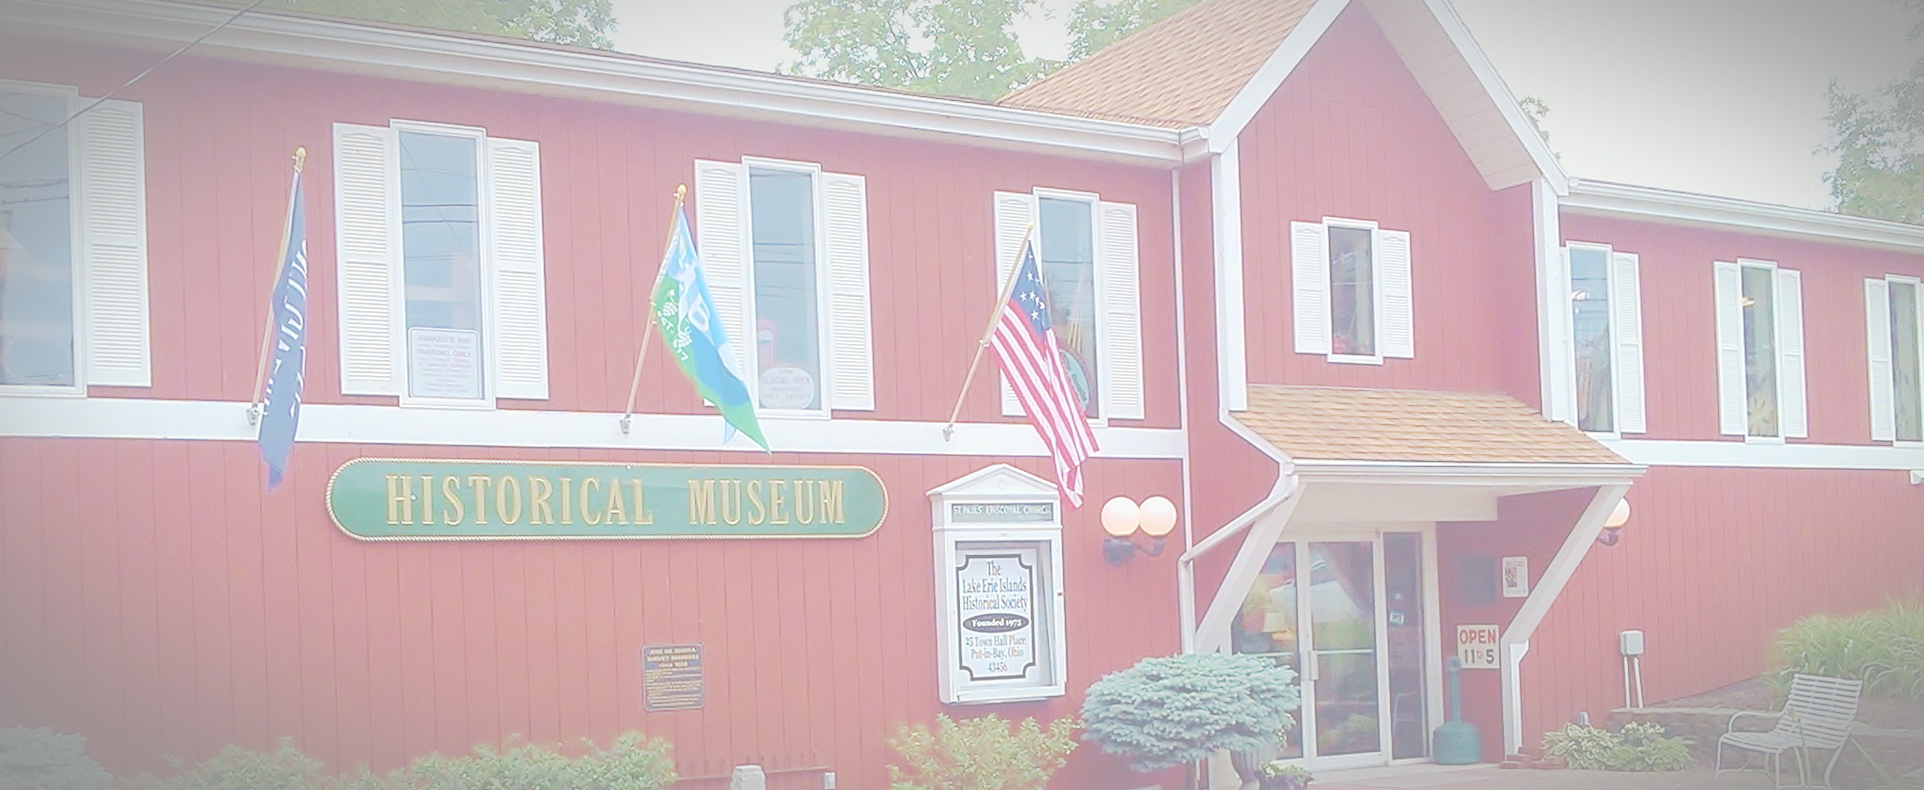 The Lake Erie Islands Historical Society